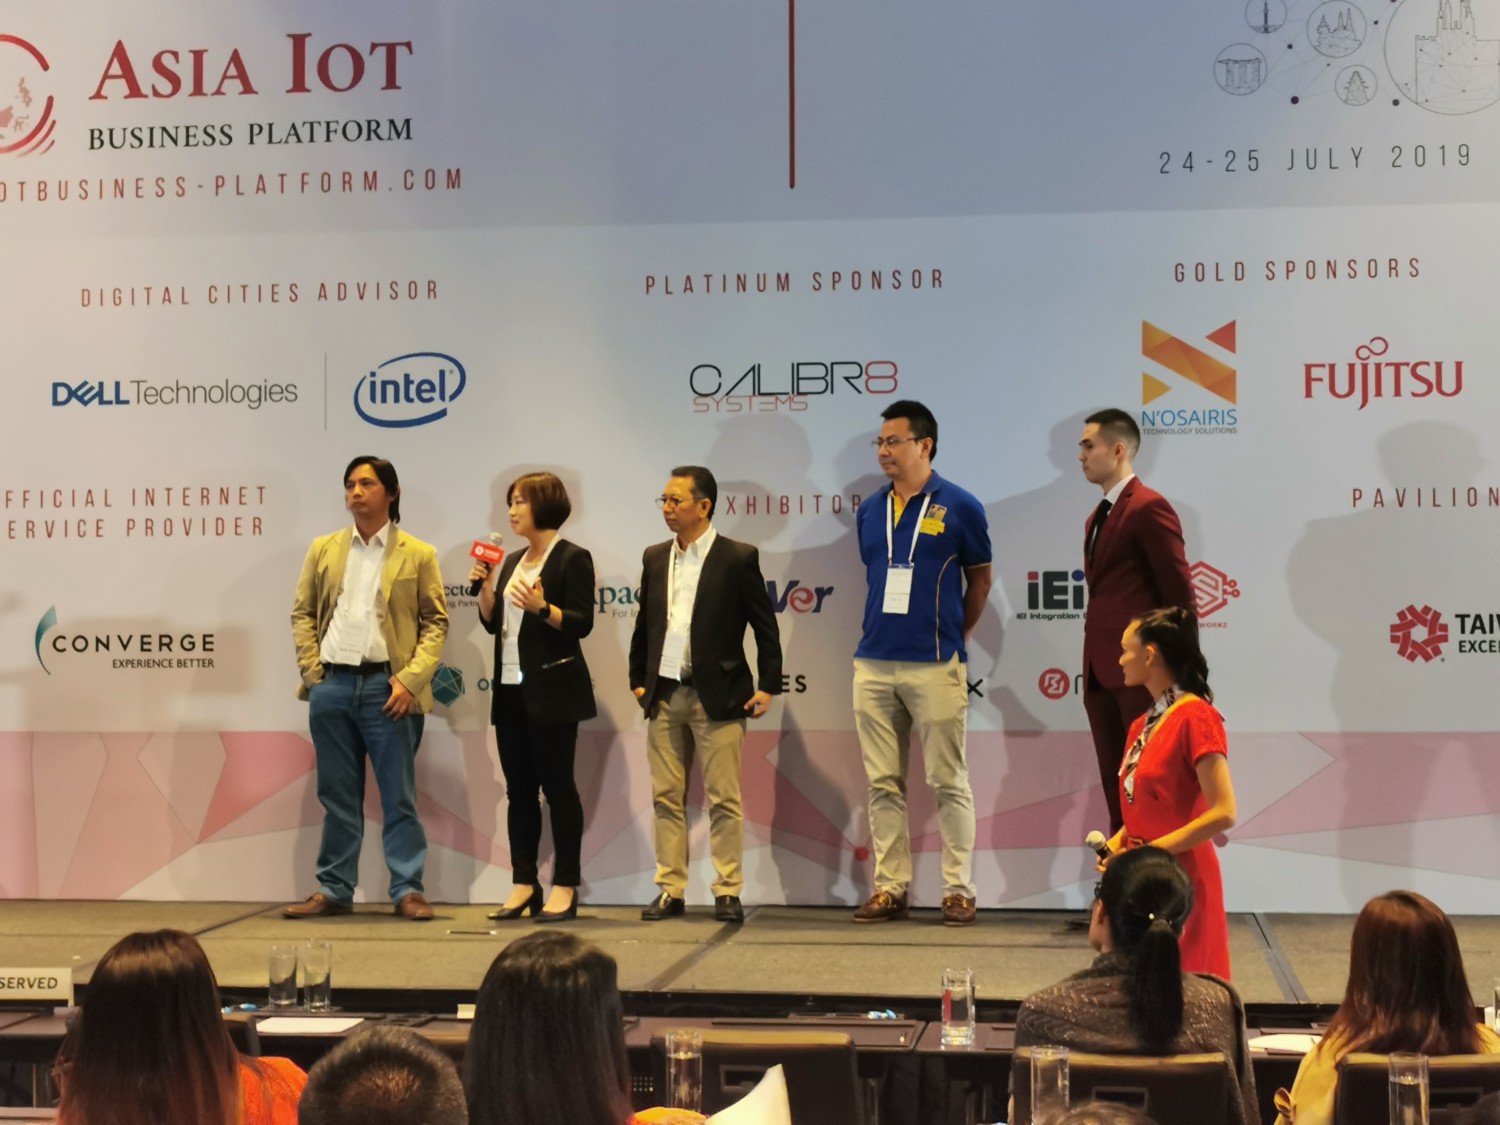 Taiwan Excellence Partners Leads Asia IoT Platform 2019 - returnal